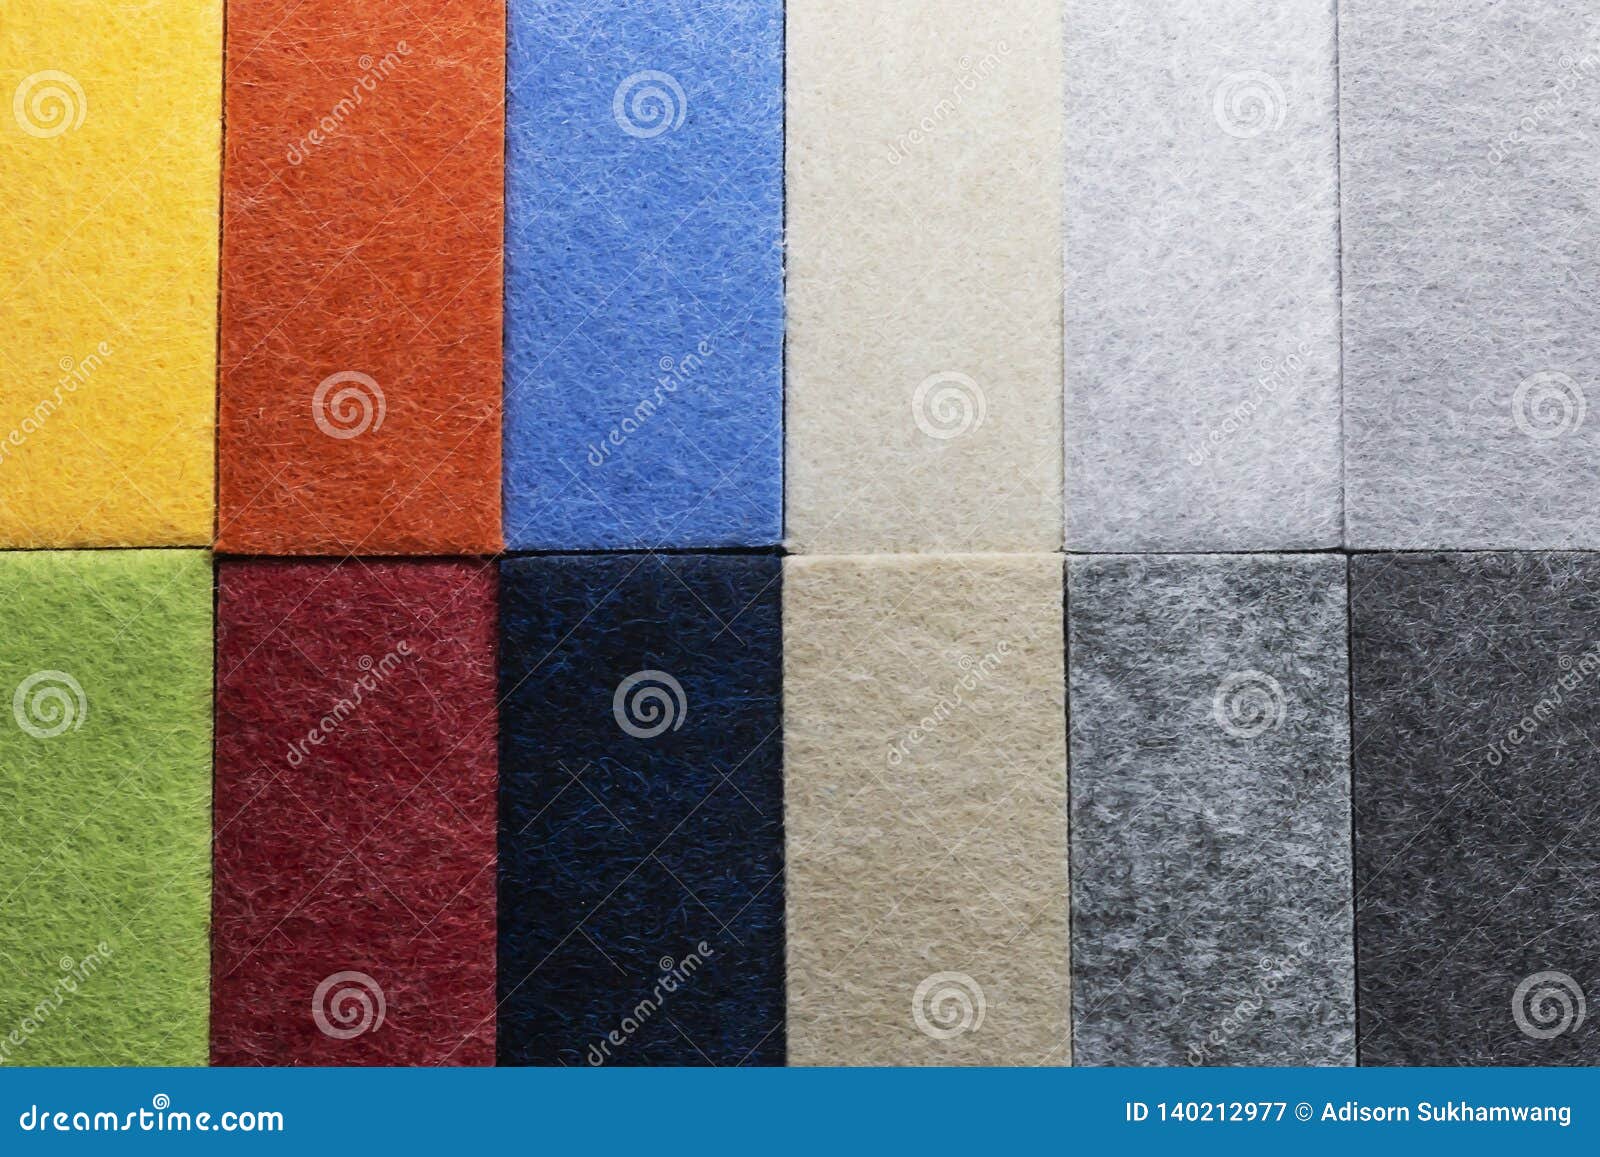 Sample Of Multi Colored Materials For Soundproof Wall